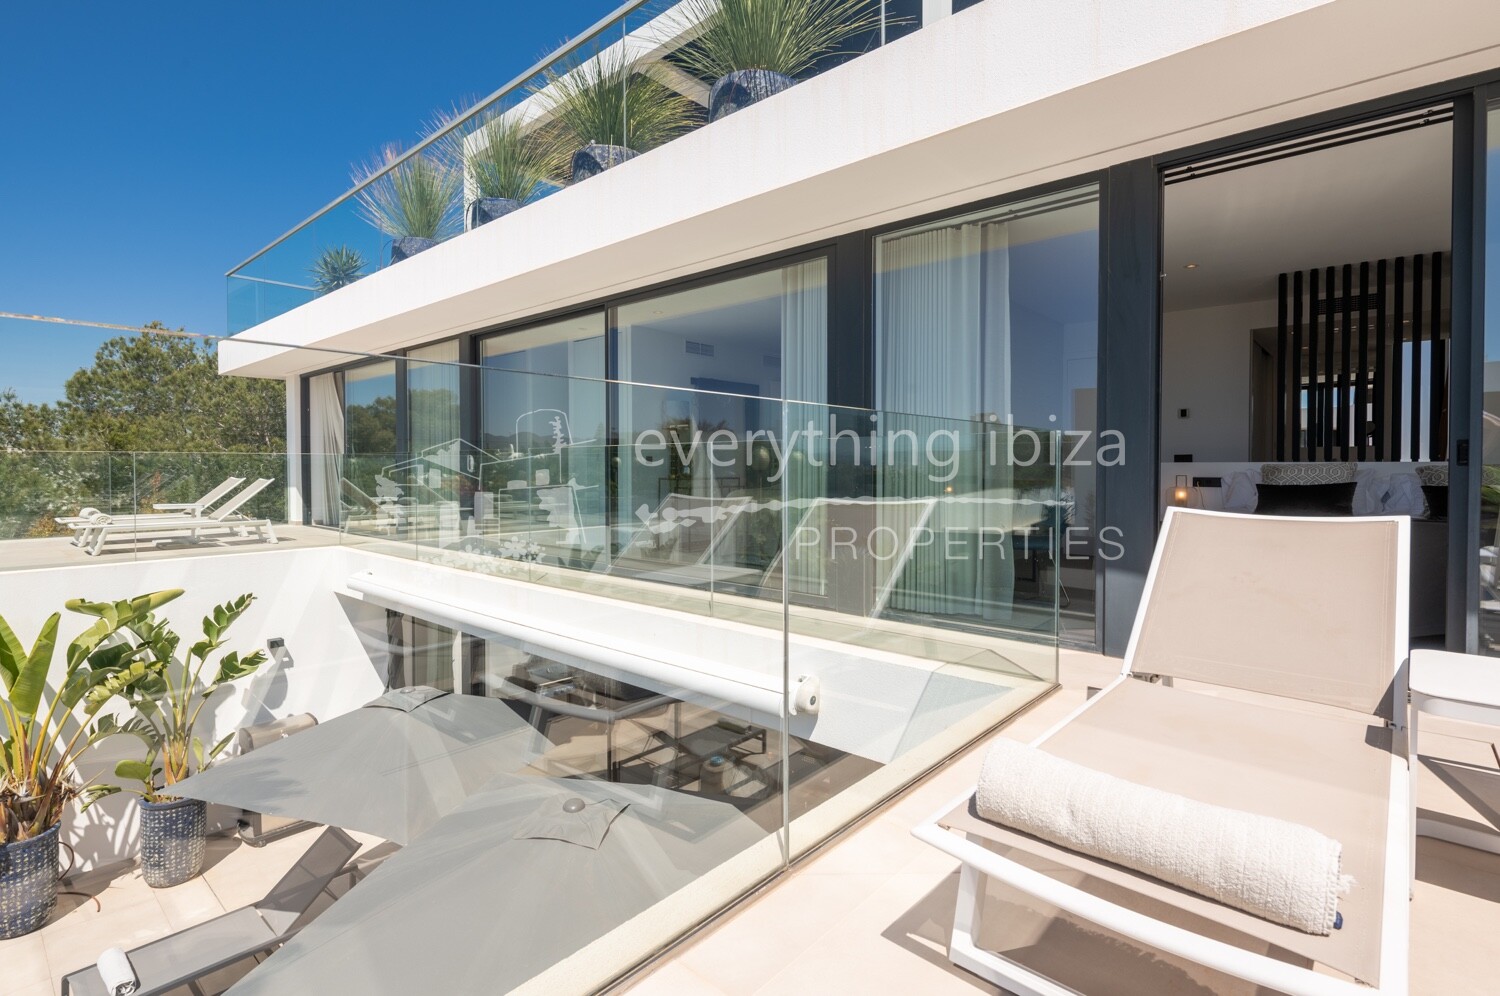 Magnificent Luxury Villa Close to the Beach & Jesus, ref. 1480, for sale in Ibiza by everything ibiza Properties